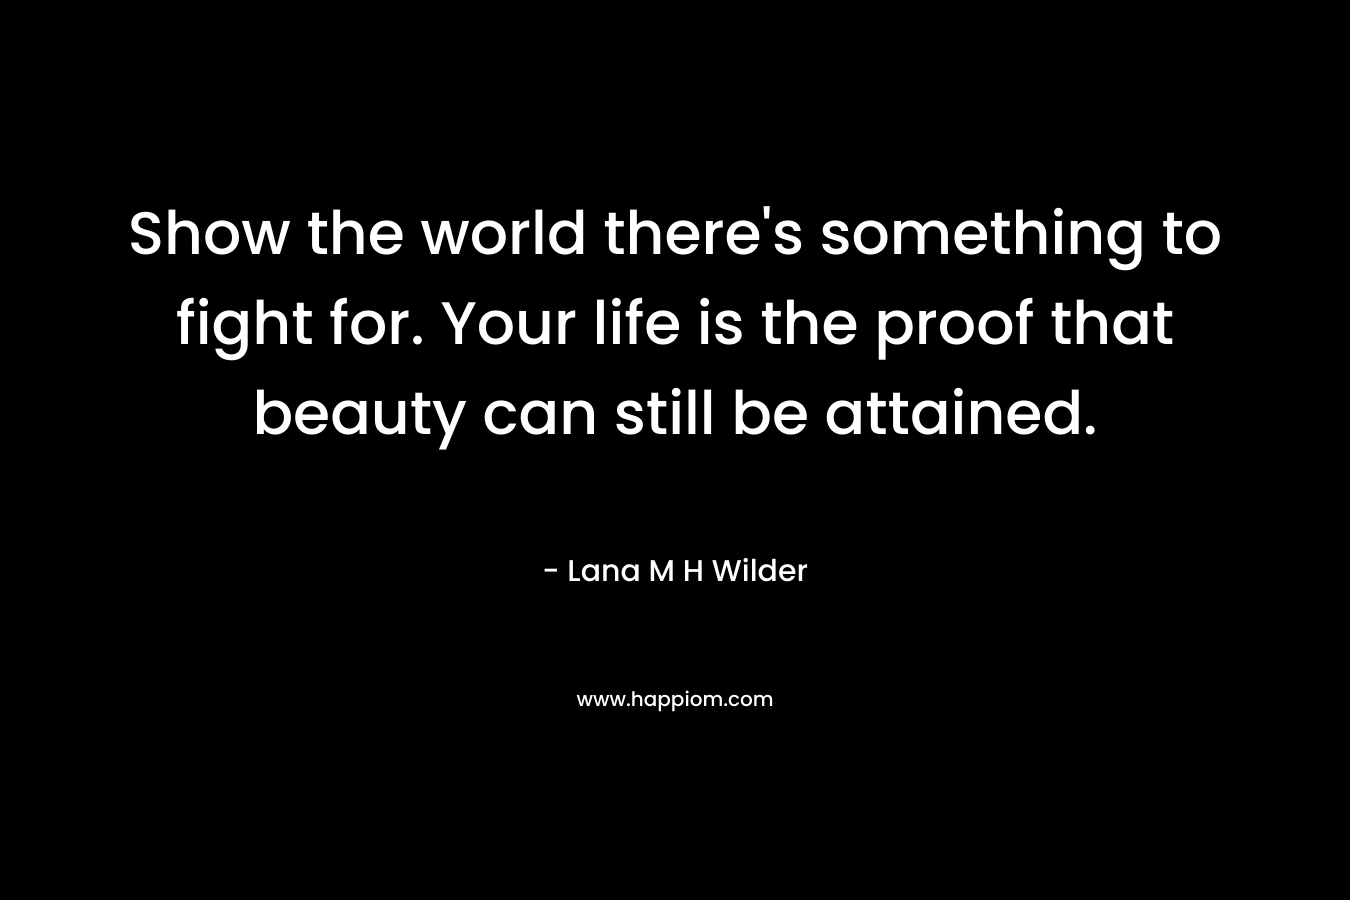 Show the world there's something to fight for. Your life is the proof that beauty can still be attained.